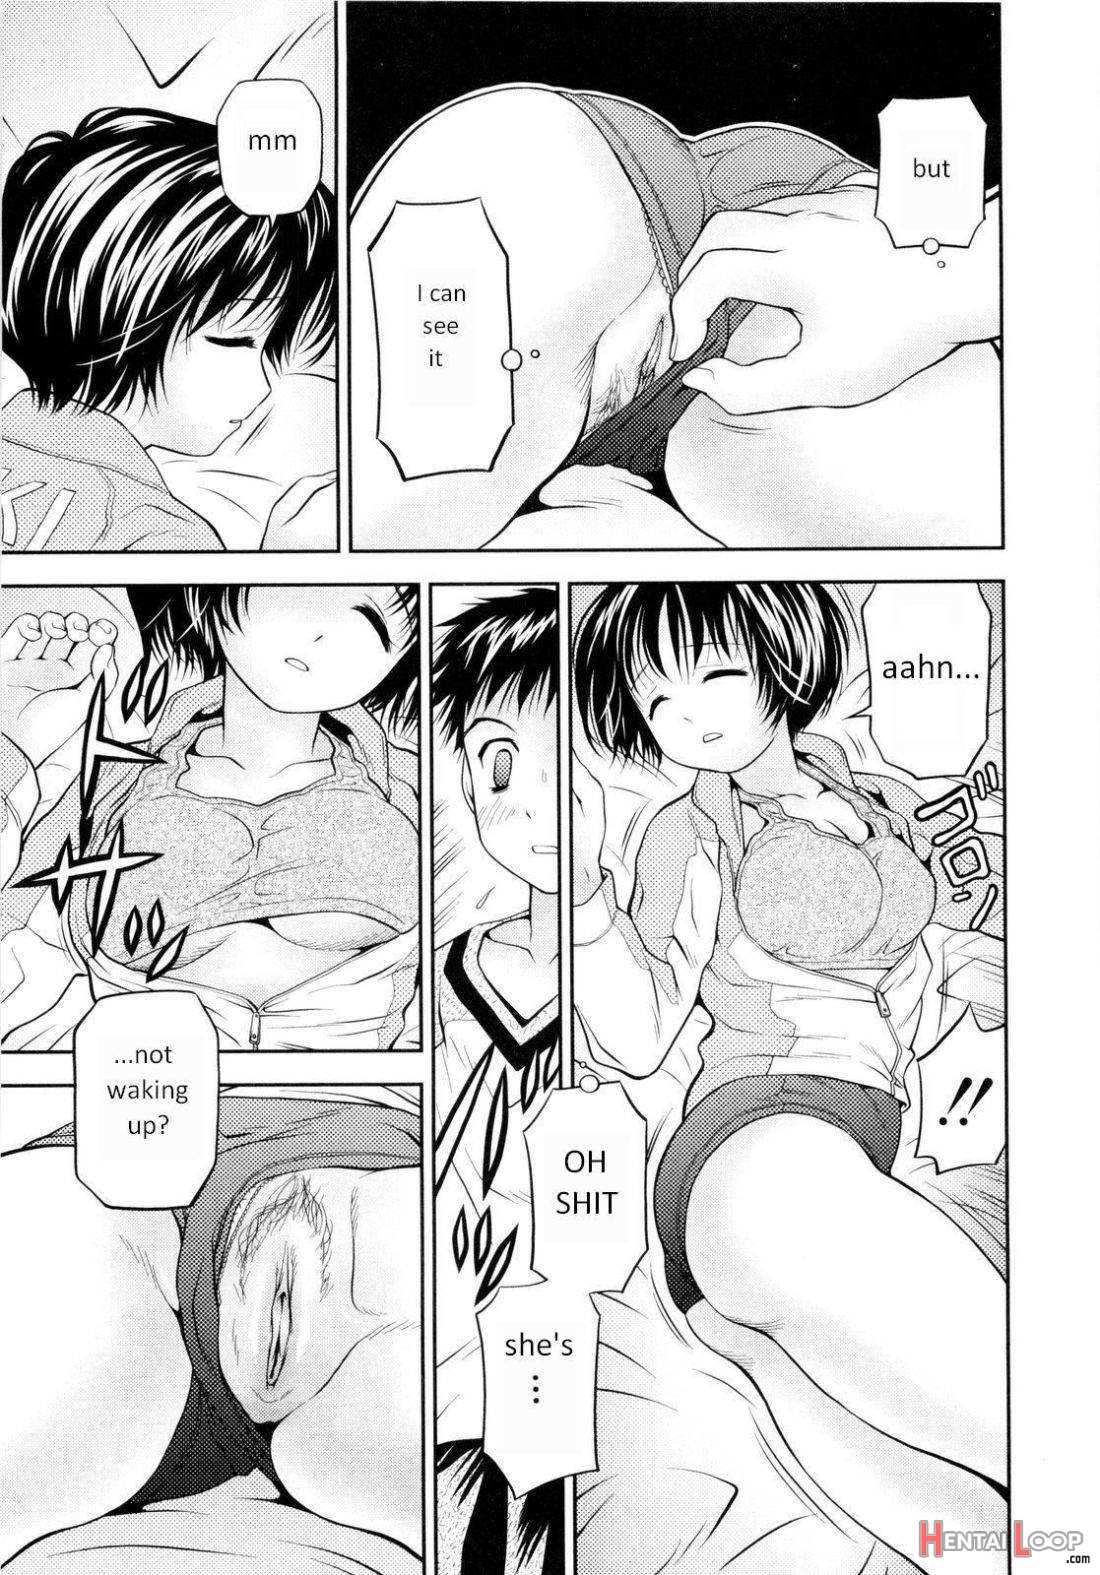 Imouto Bloomer page 5